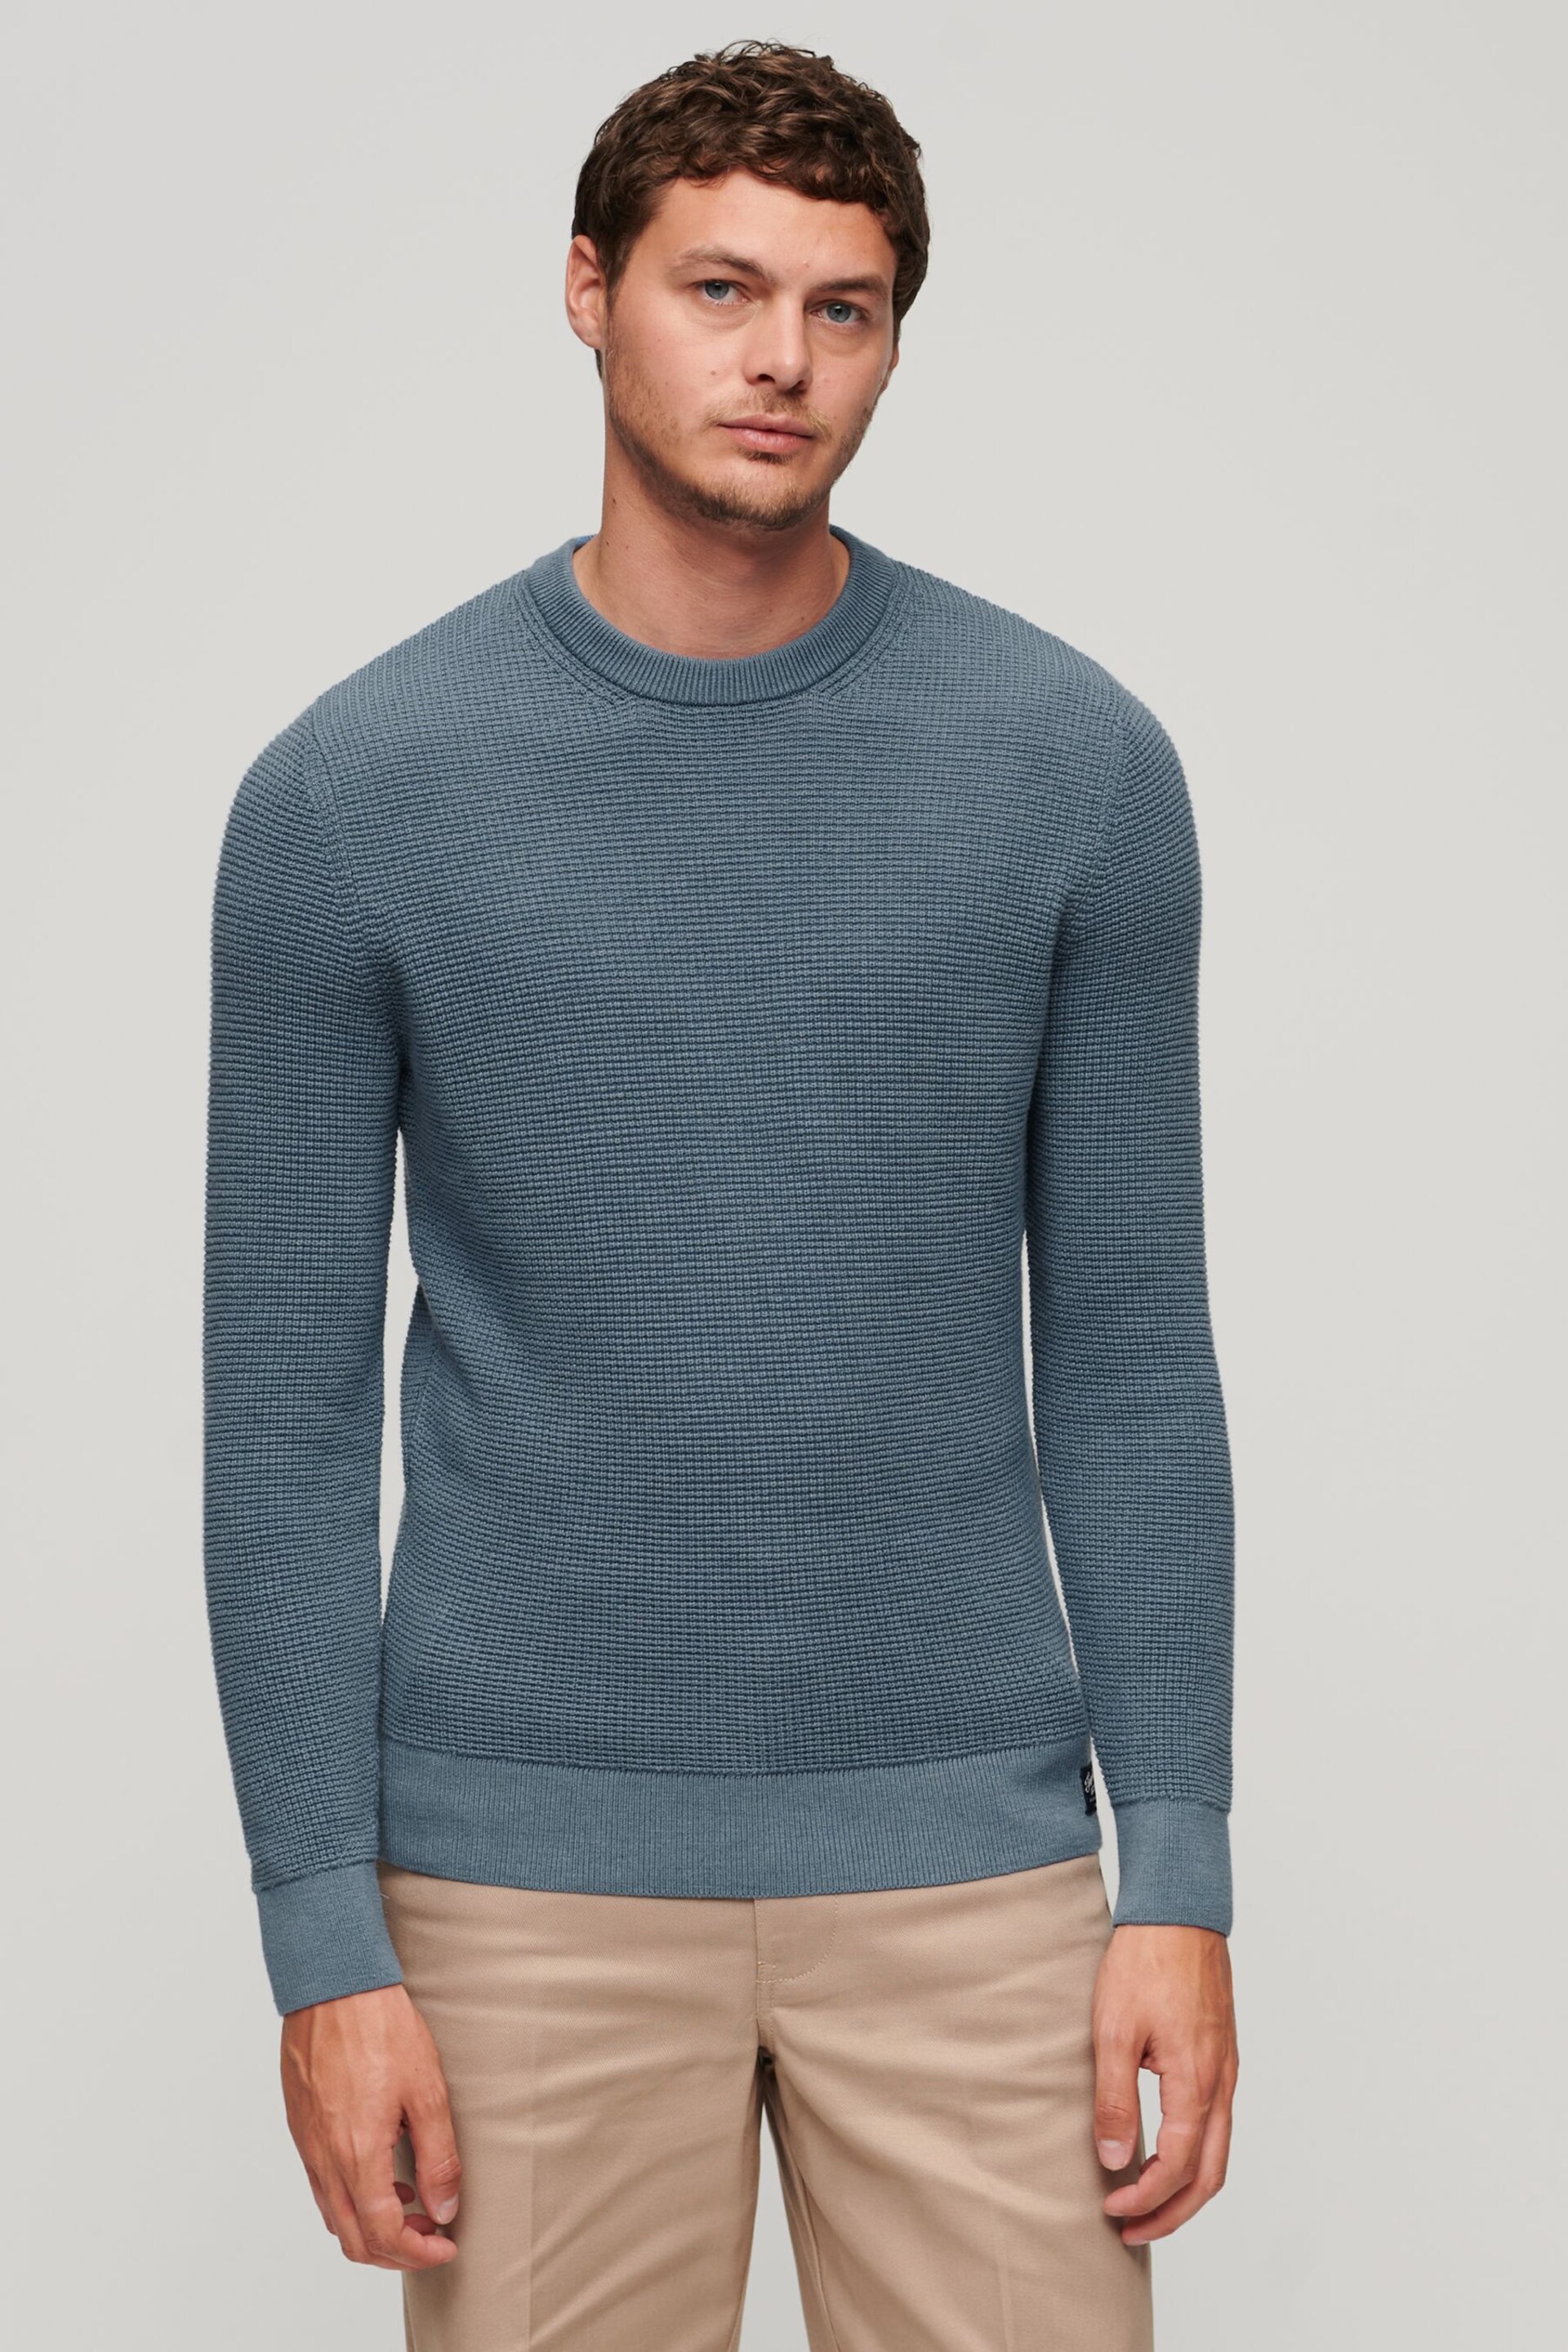 Superdry Blue Chrome Textured Crew Knit Jumper - Image 1 of 6